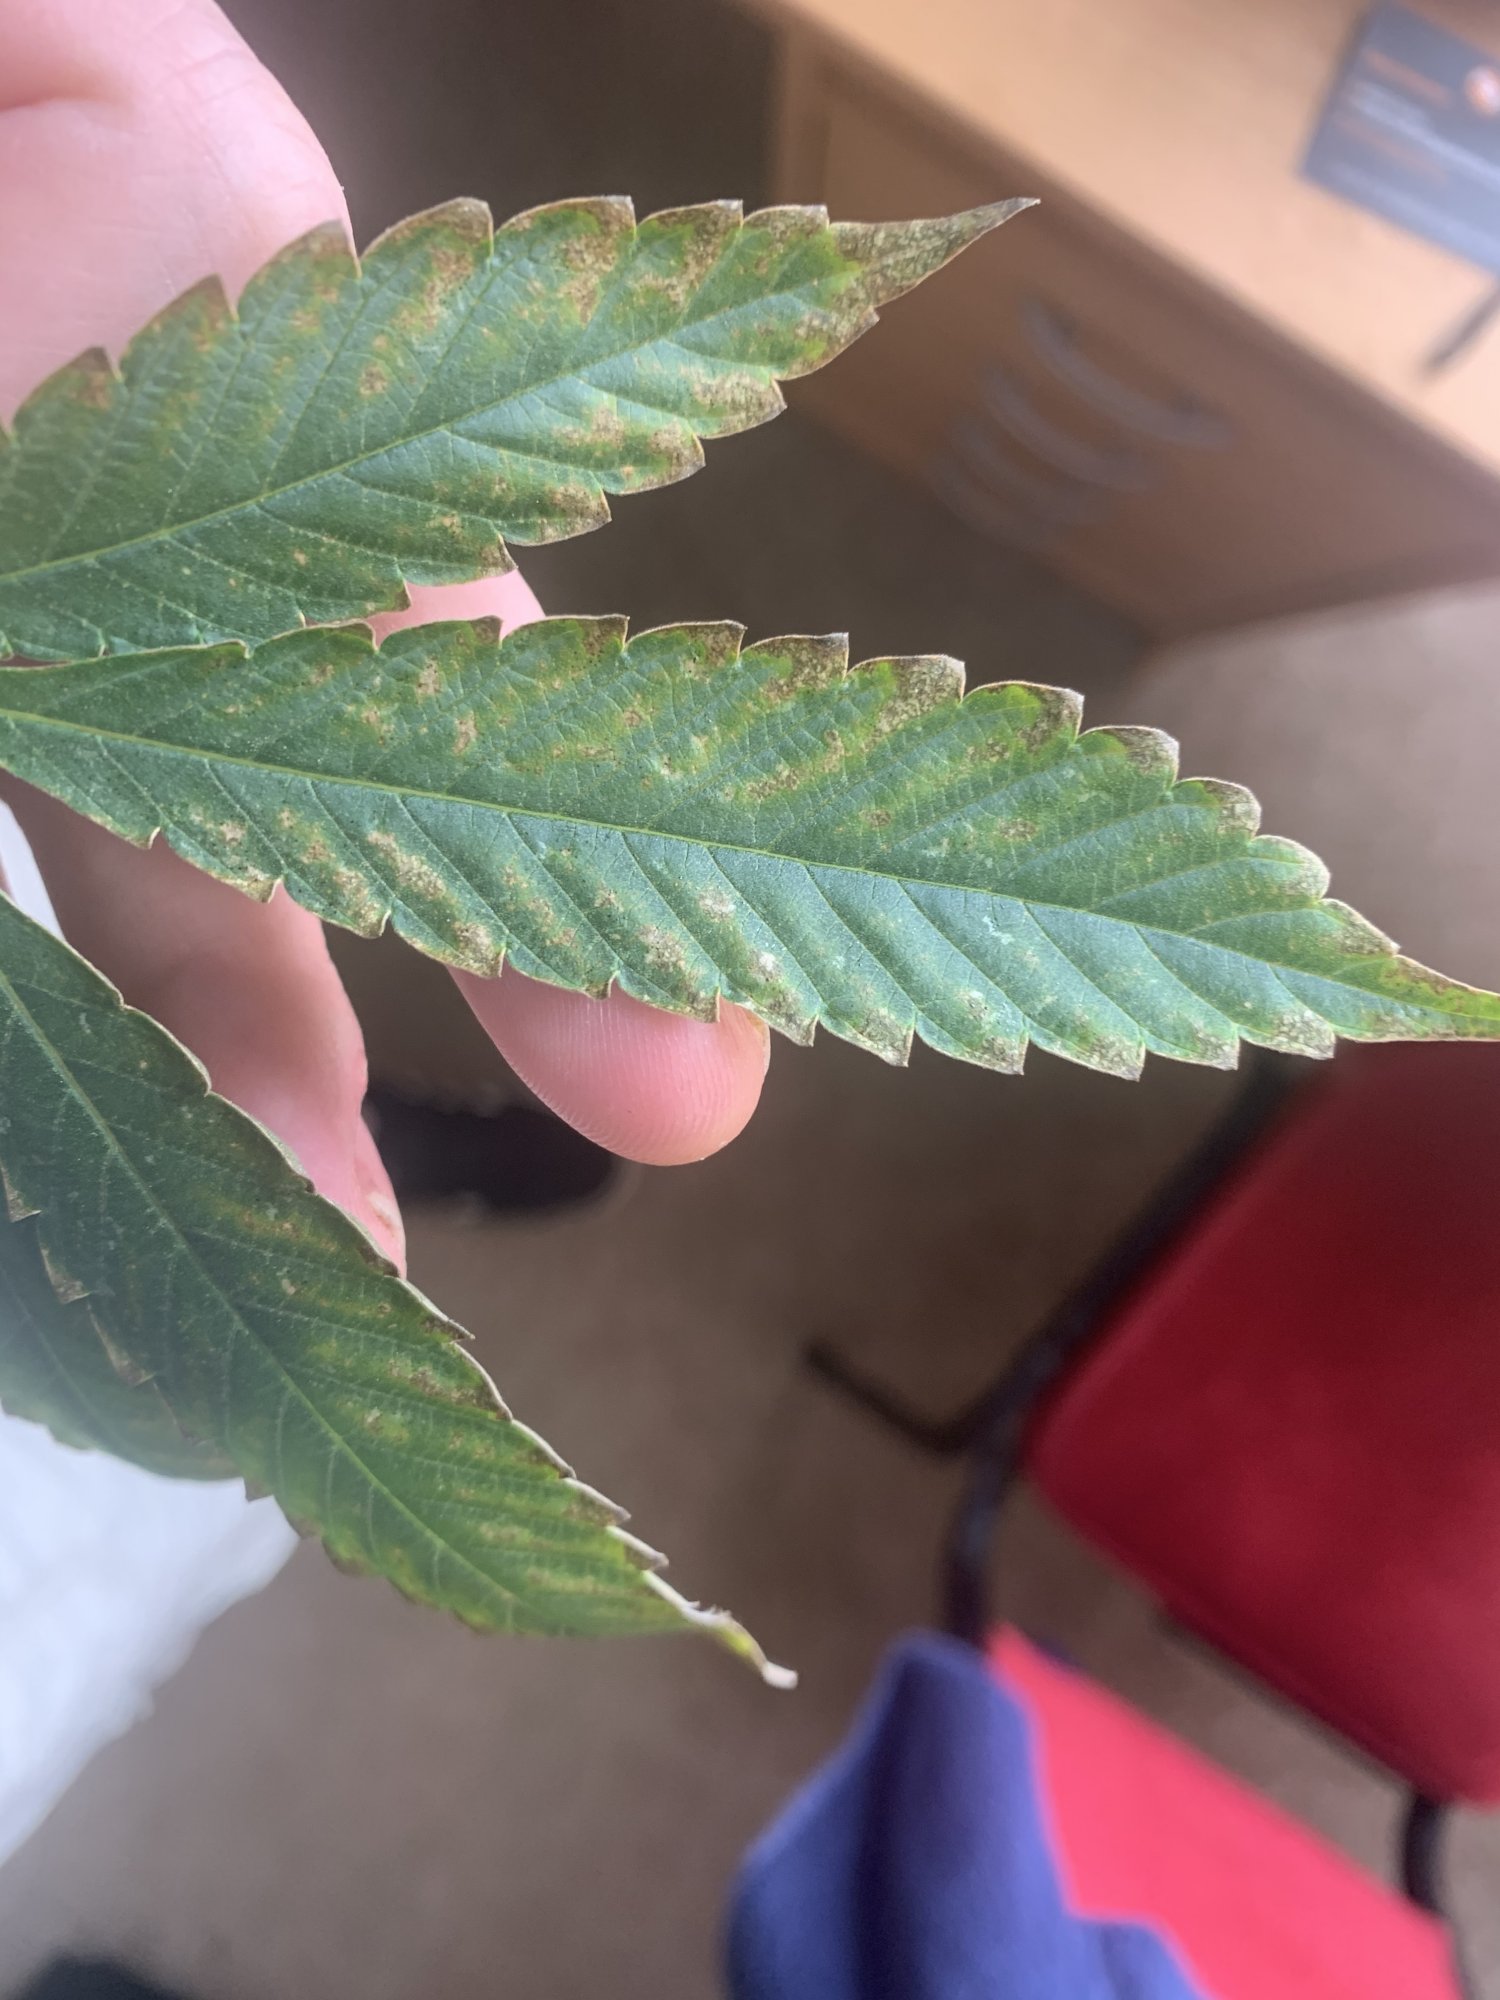 Leaf problems during flowering phase